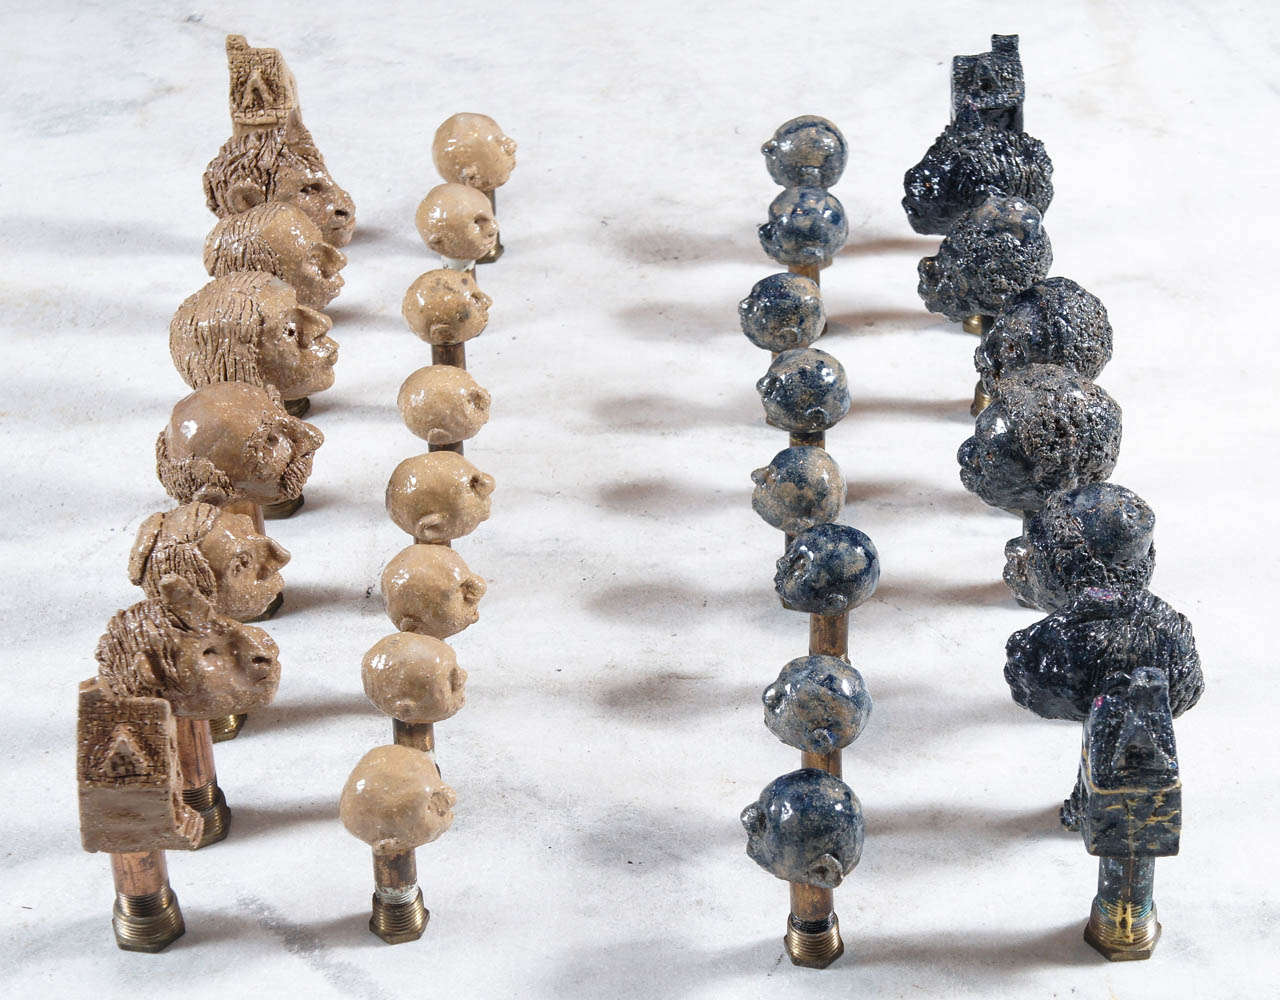 complete chess set - each piece individually hand sculpted - mounted on copper plumbers pipe - 